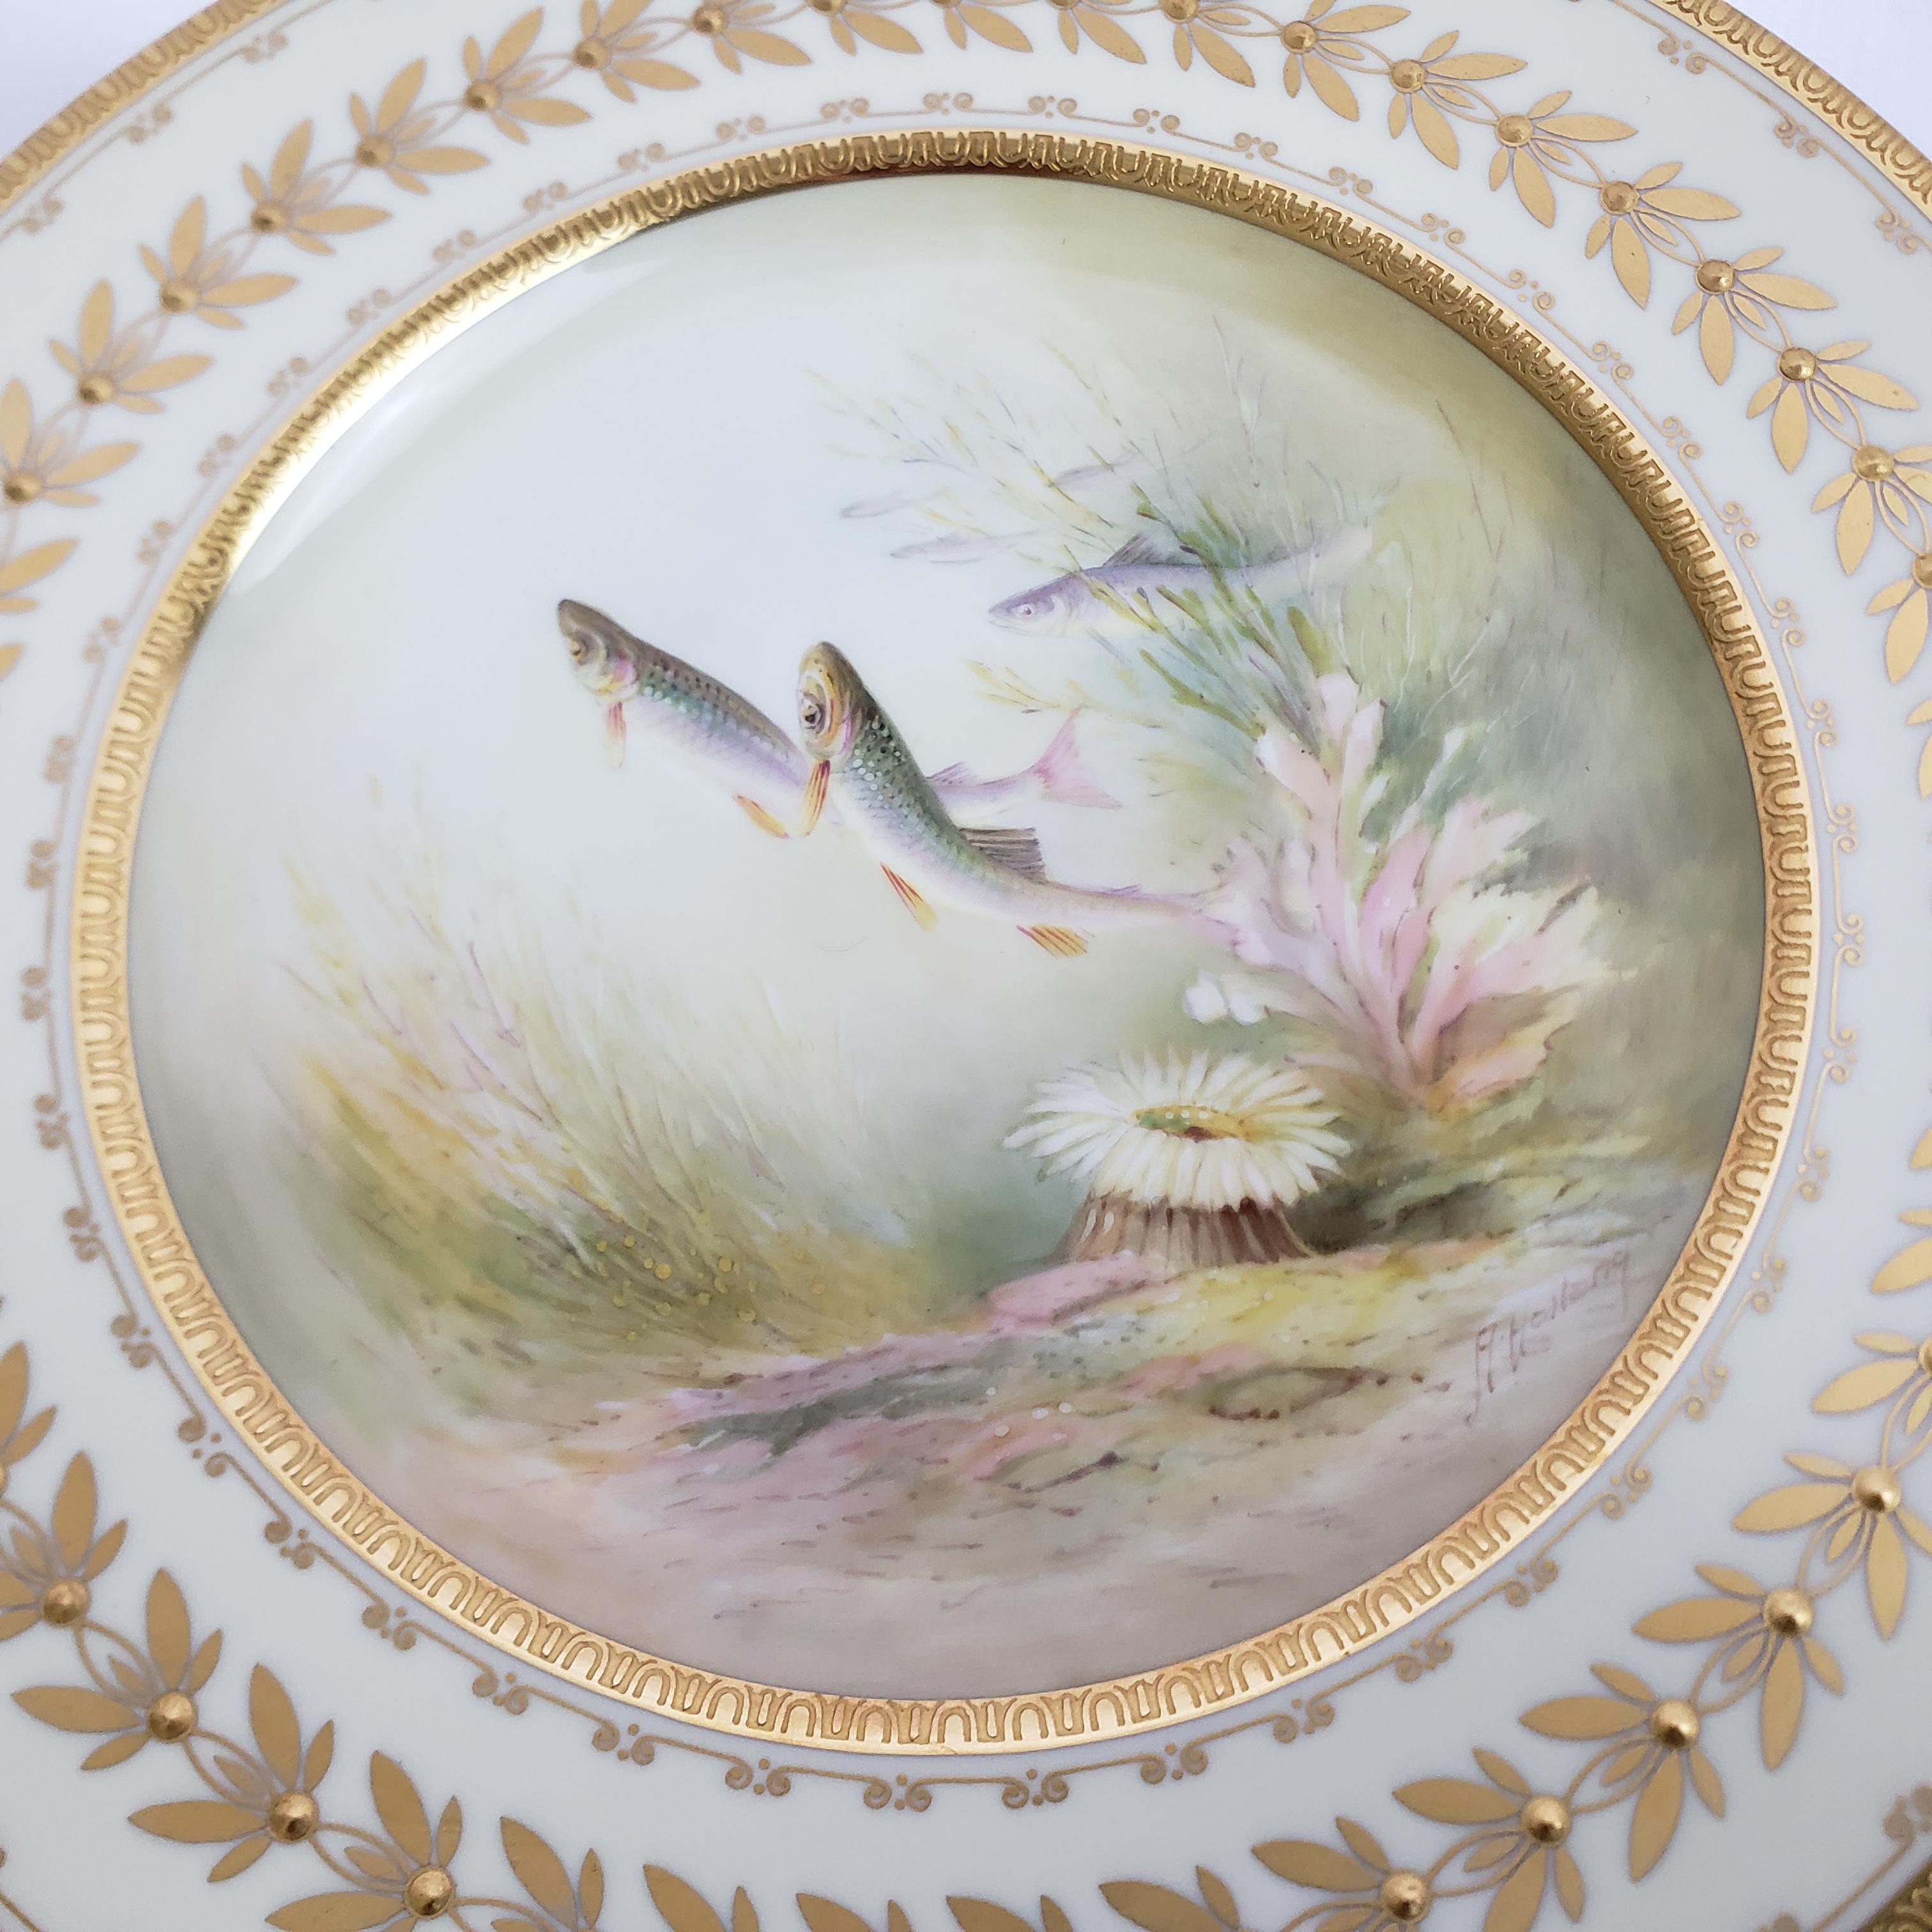 12 Antique Minton Hand-Painted Cabinet Plates Signed A. Holland Depicting Fish For Sale 6